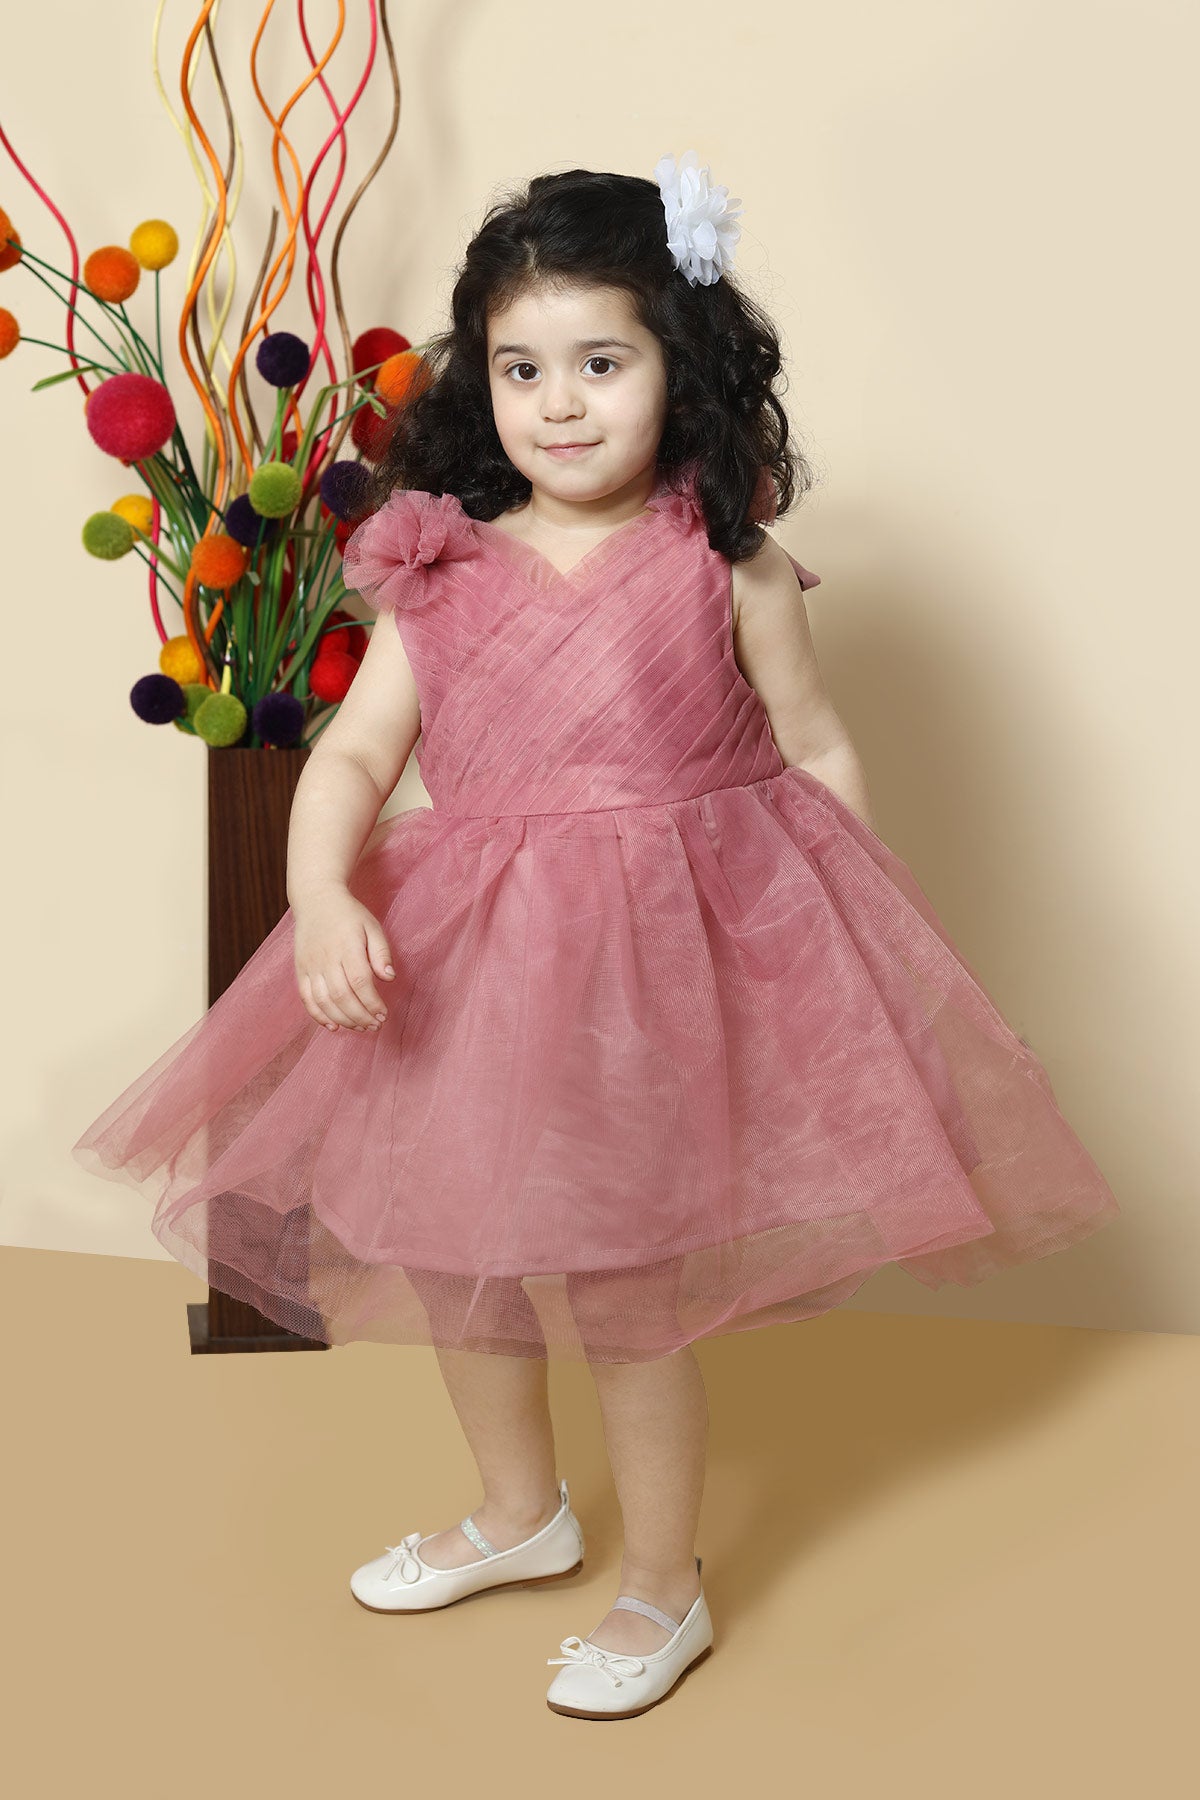 Cotton Casual Designer Baby Girl Frock, Size: 16x24, Age Group: 1-5 Years  at best price in Mumbai